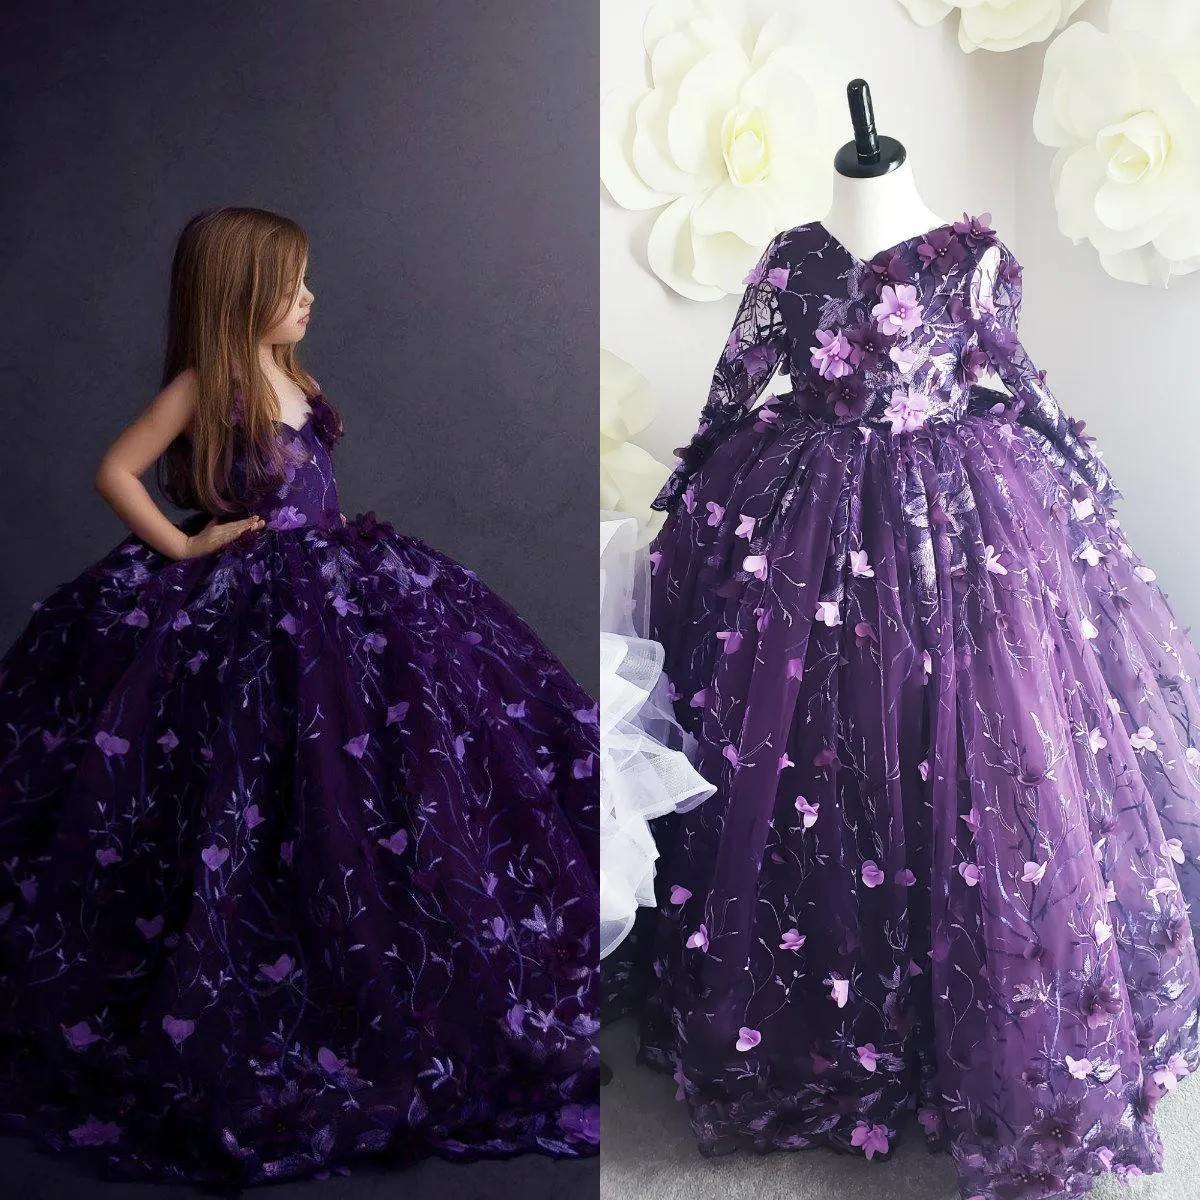 2020 New Purple Flower Girl Dresses for Weddings V Neck Lace 3D Floral Appliques Ball Gown Toddler Girls Birthday Dress Pageant Gowns